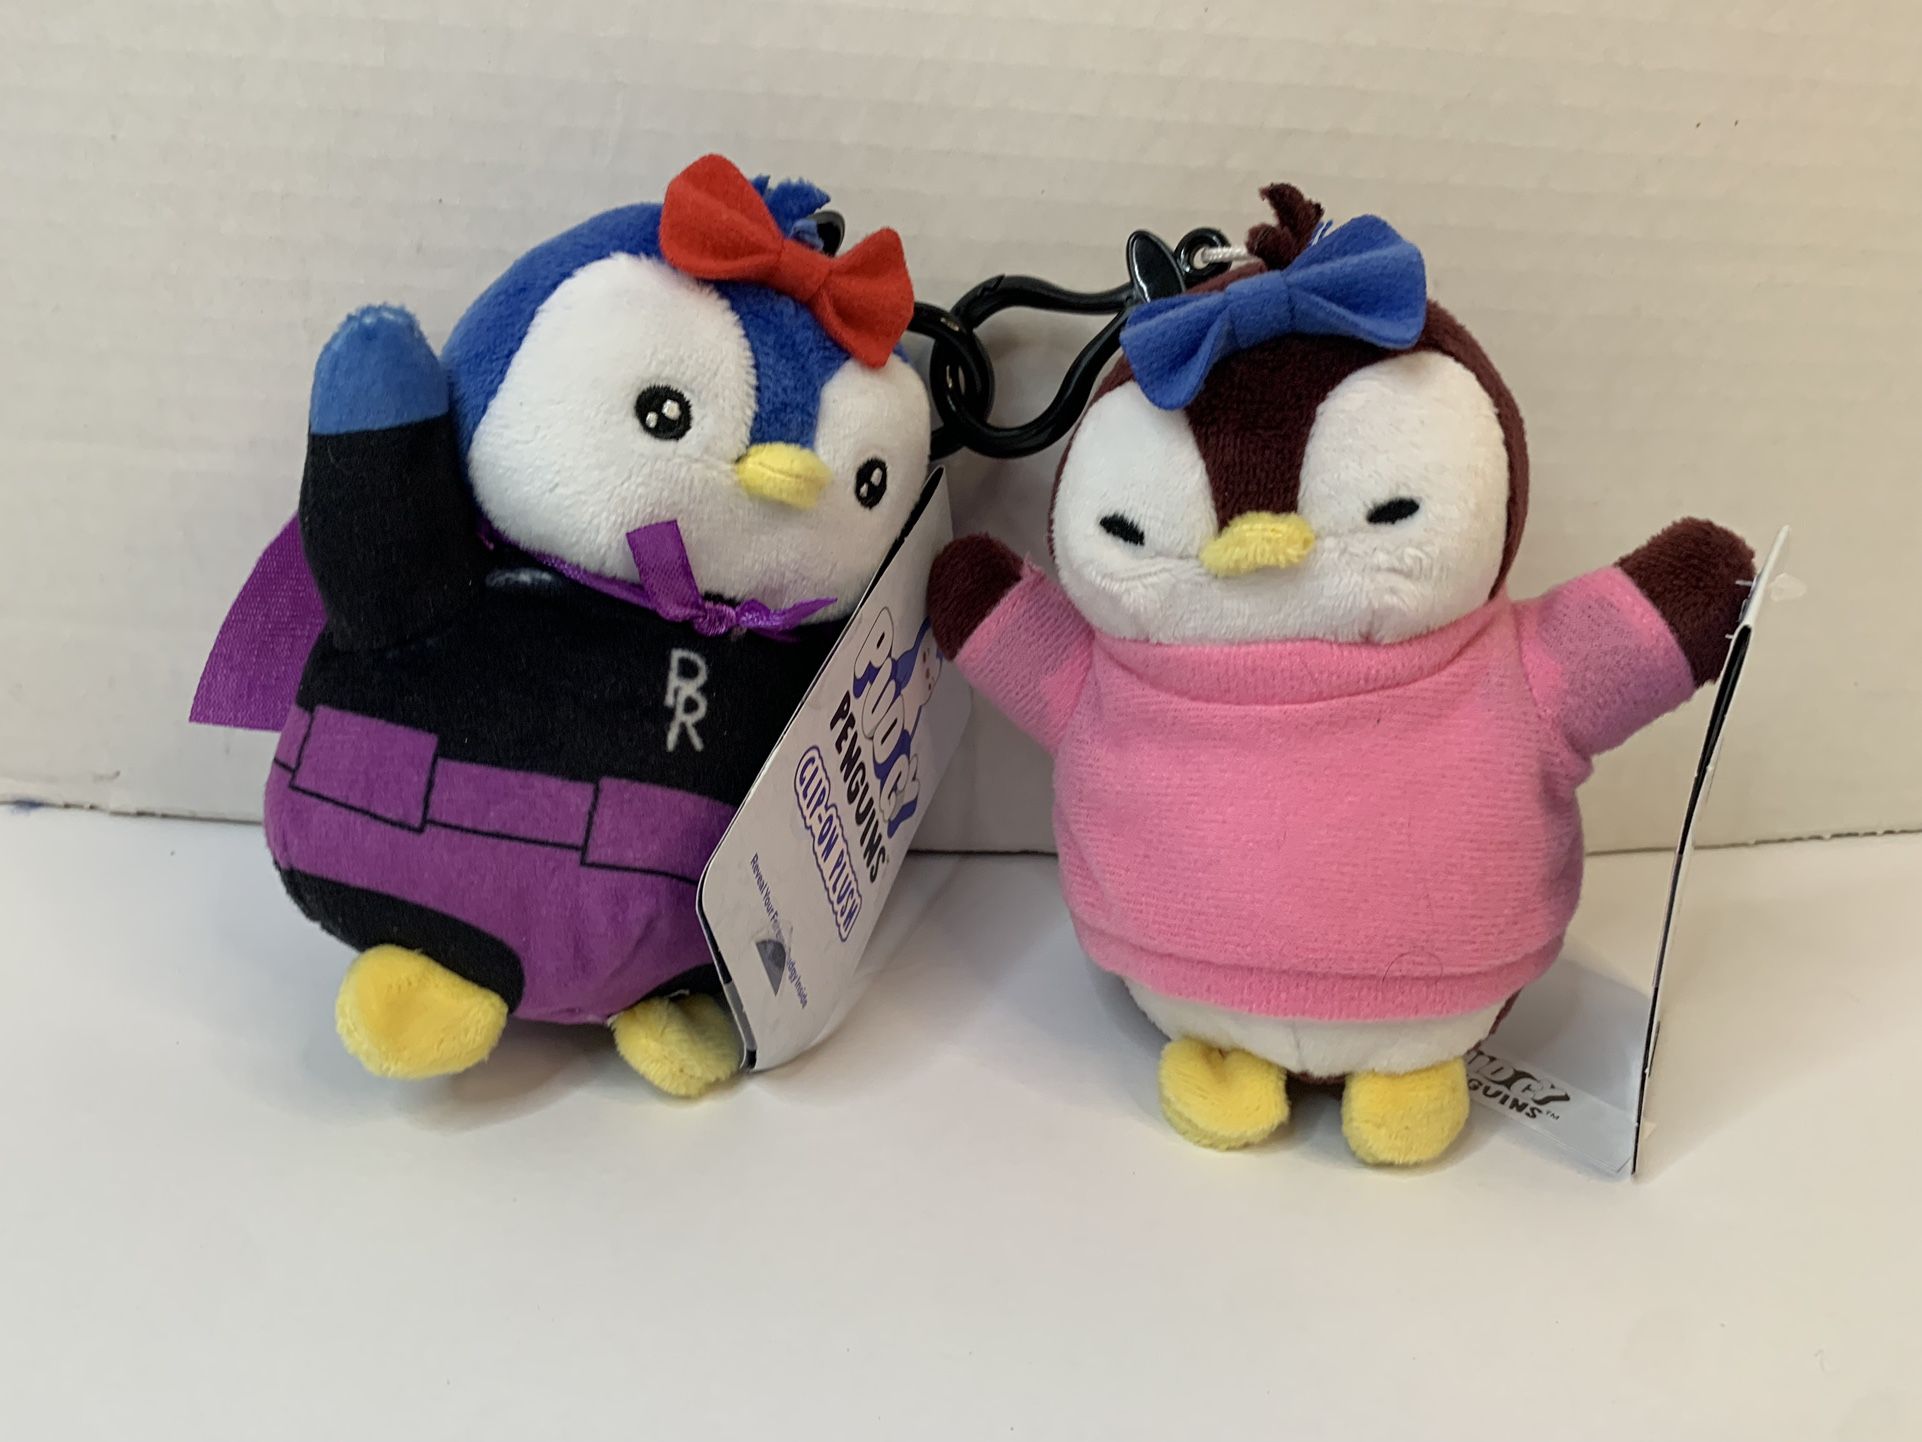 Two Clip-On Plush Pudgy Penguins Bow Sweater Buddy